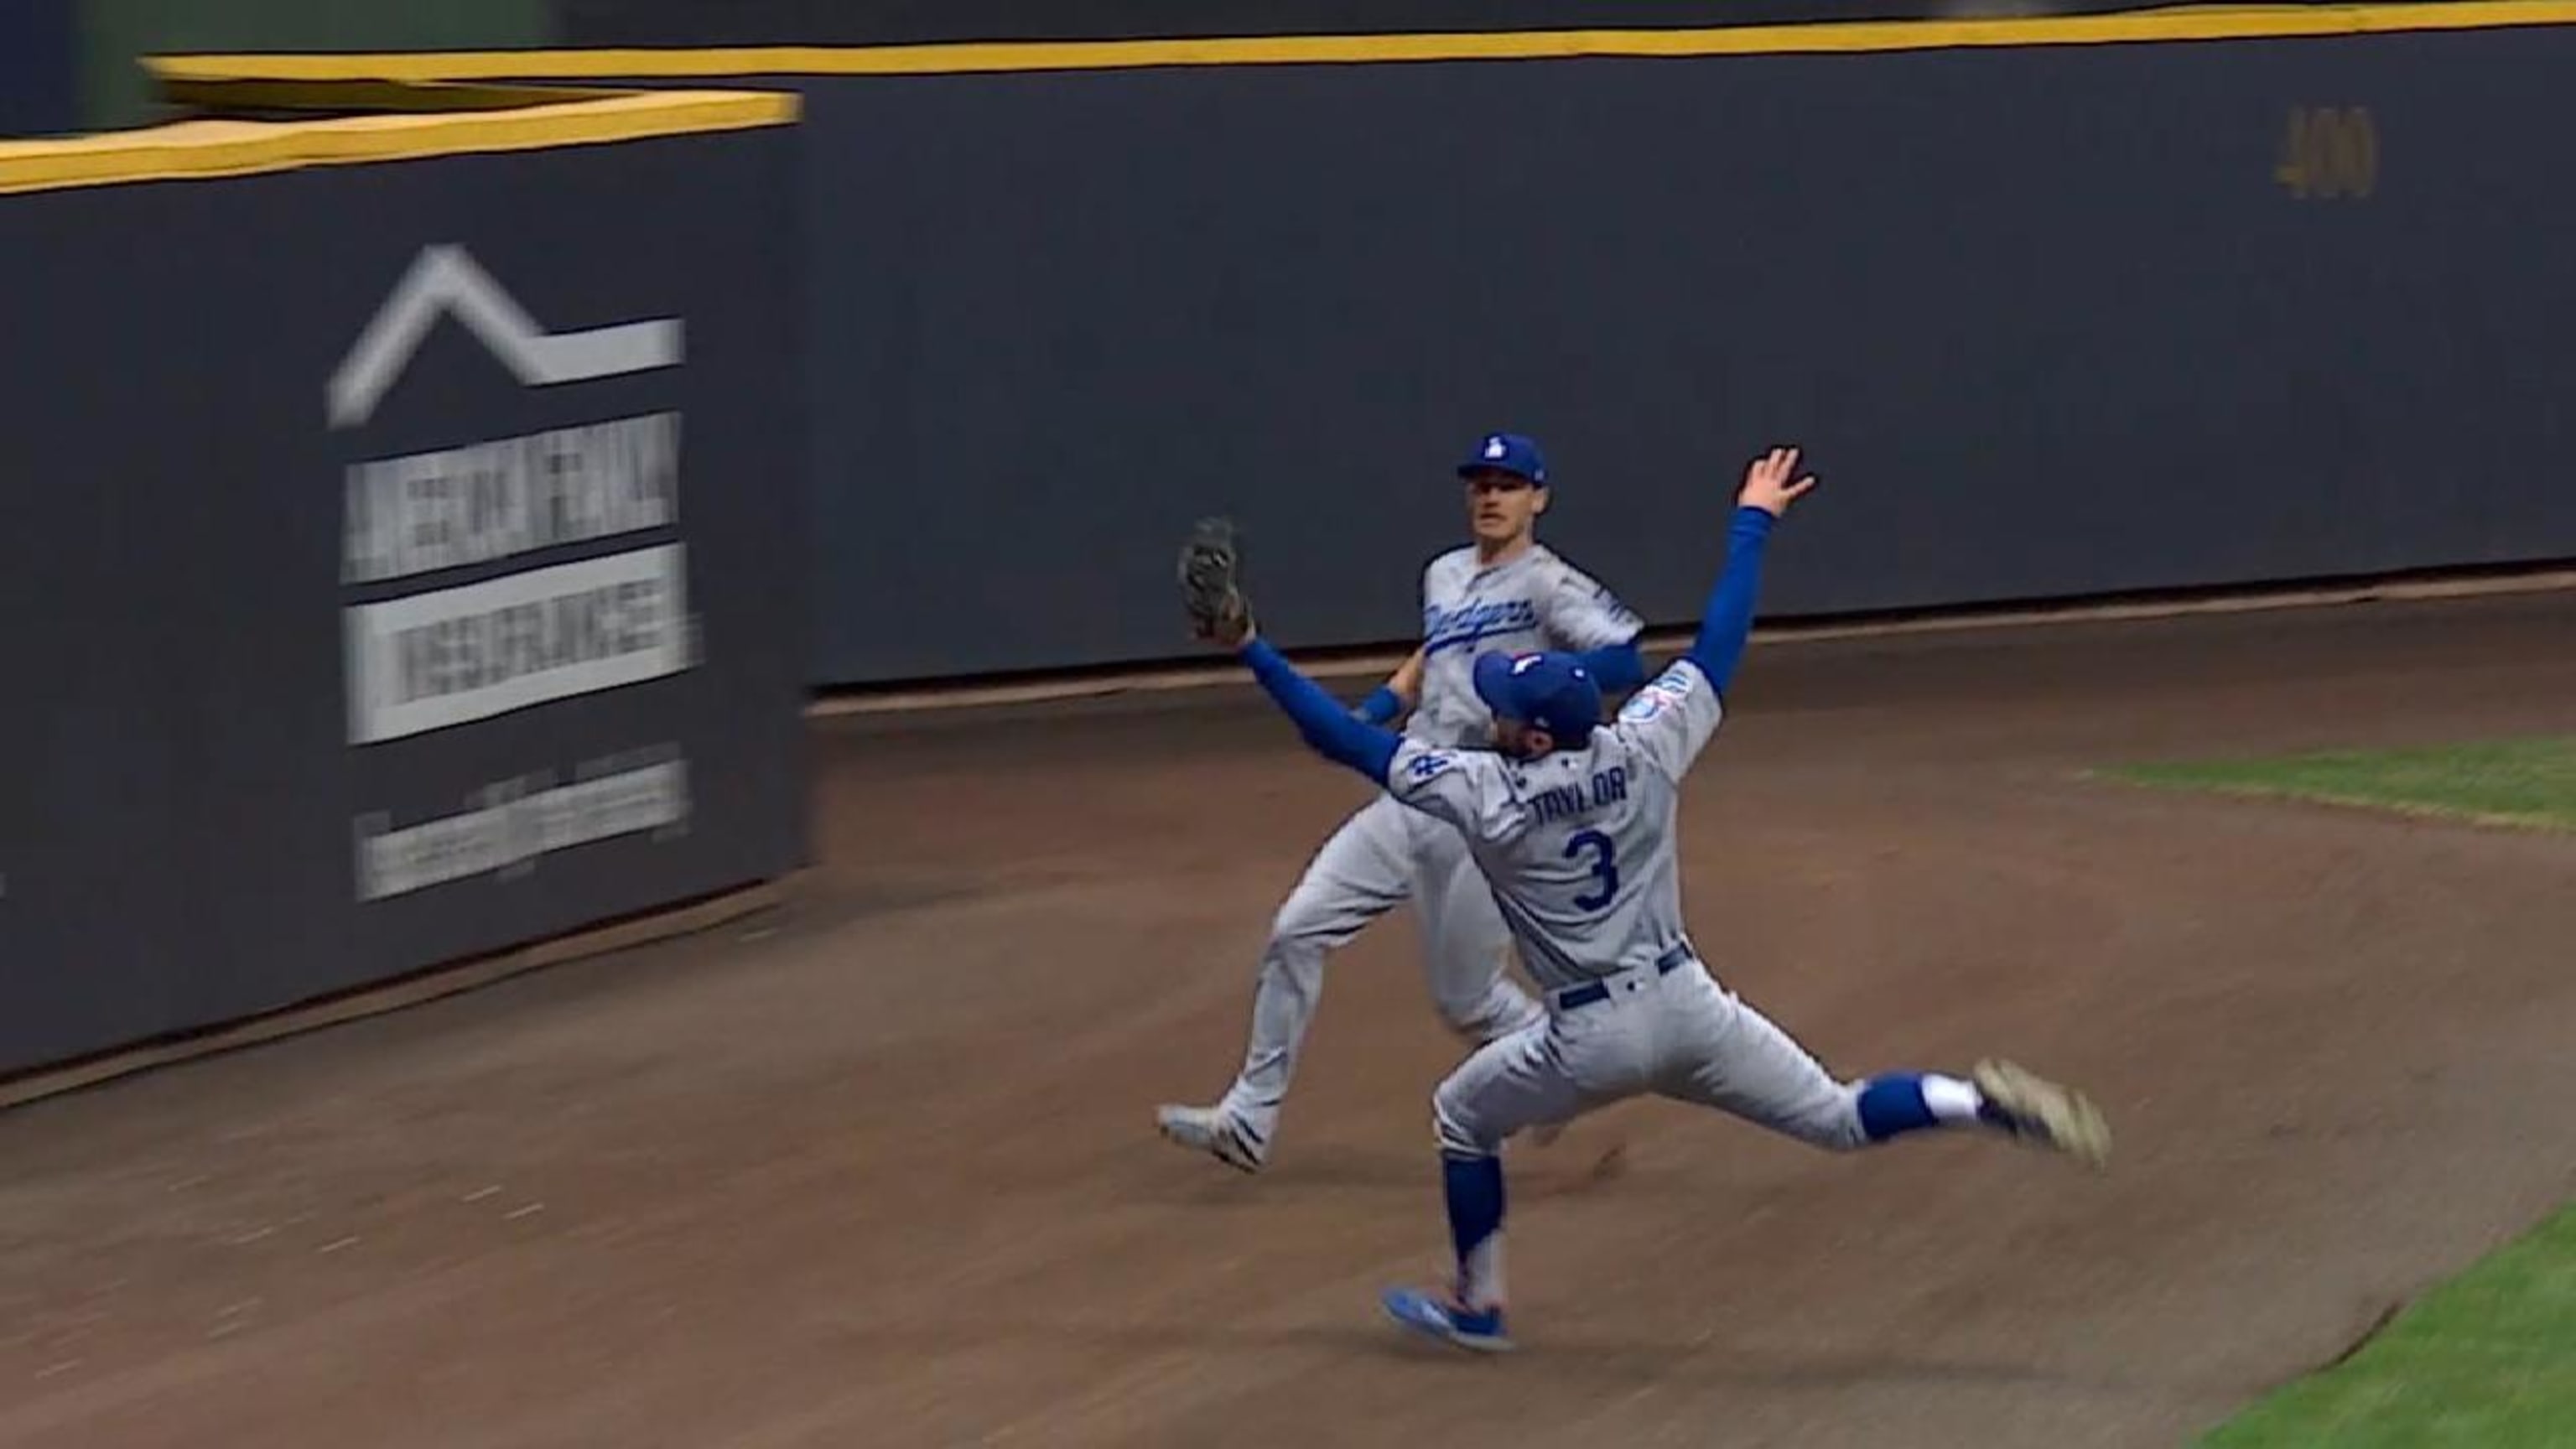 MLB playoffs: Chris Taylor's phenomenal catch one for the ages